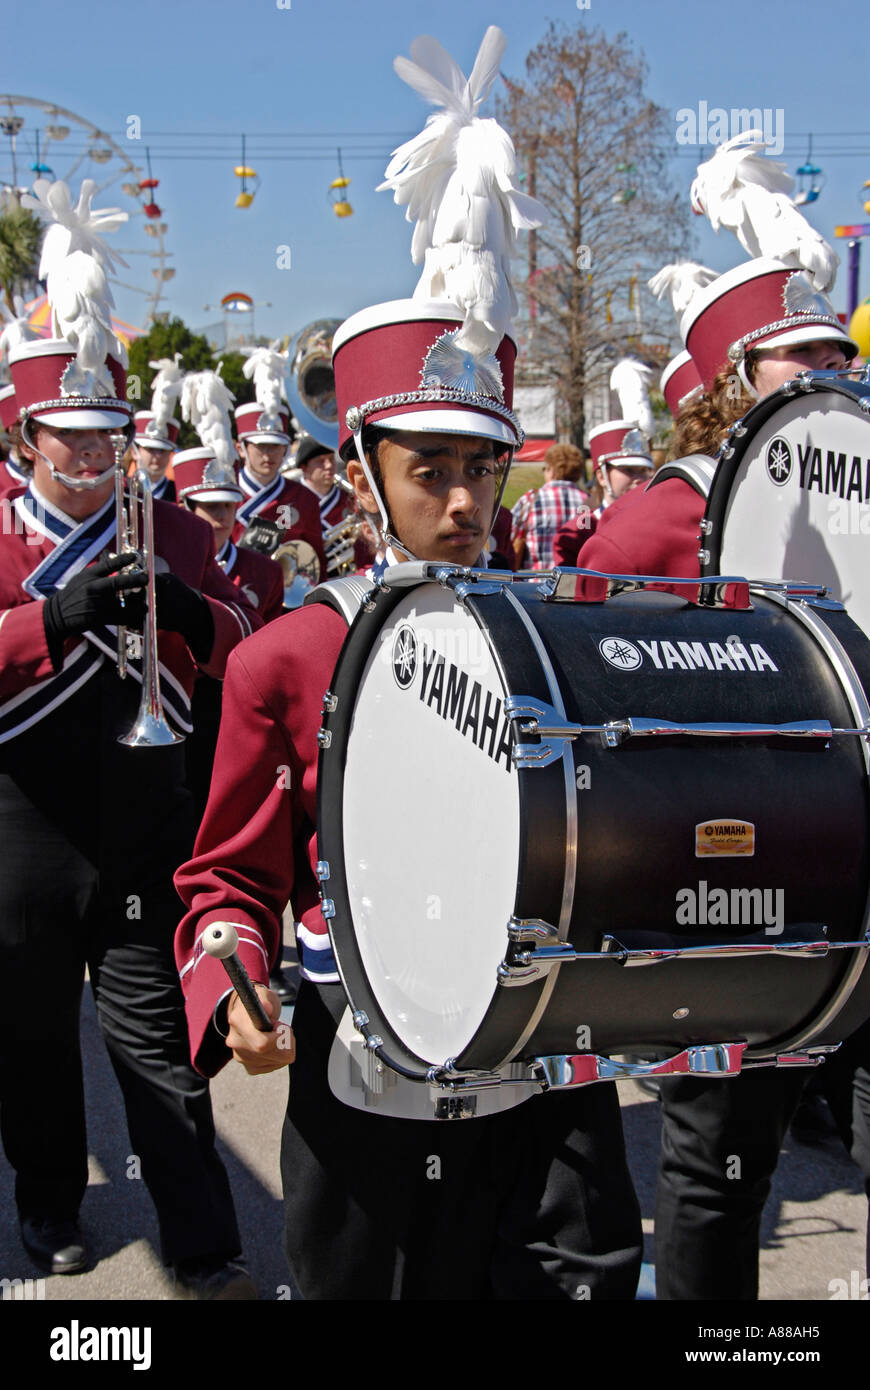 Palm Harbor University High School Marching Band participates in a parade at the Florida State Fair at Tampa Stock Photo